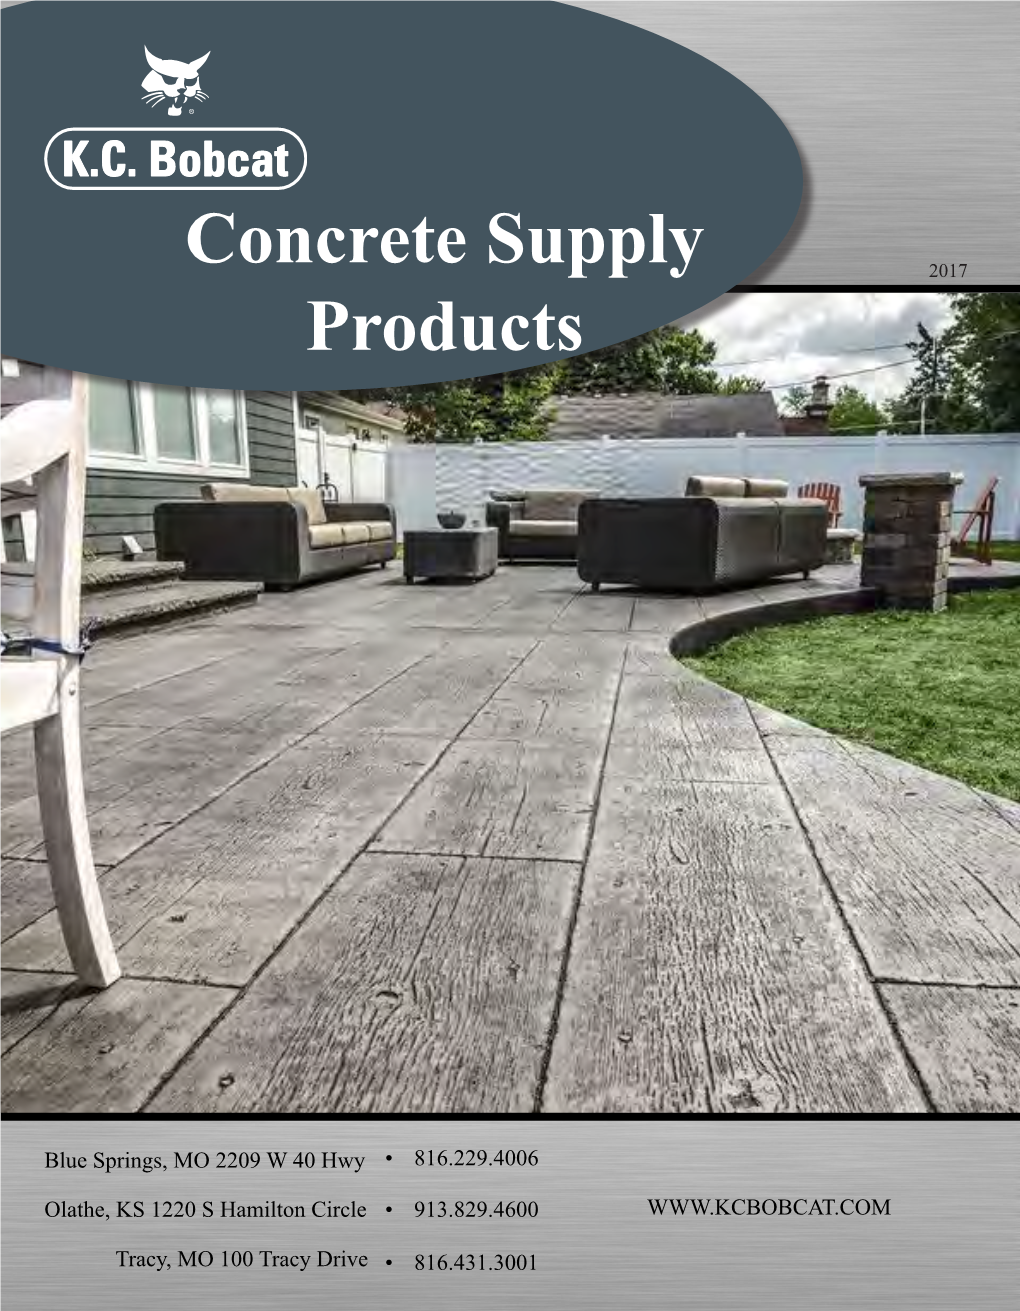 Concrete Supply Products